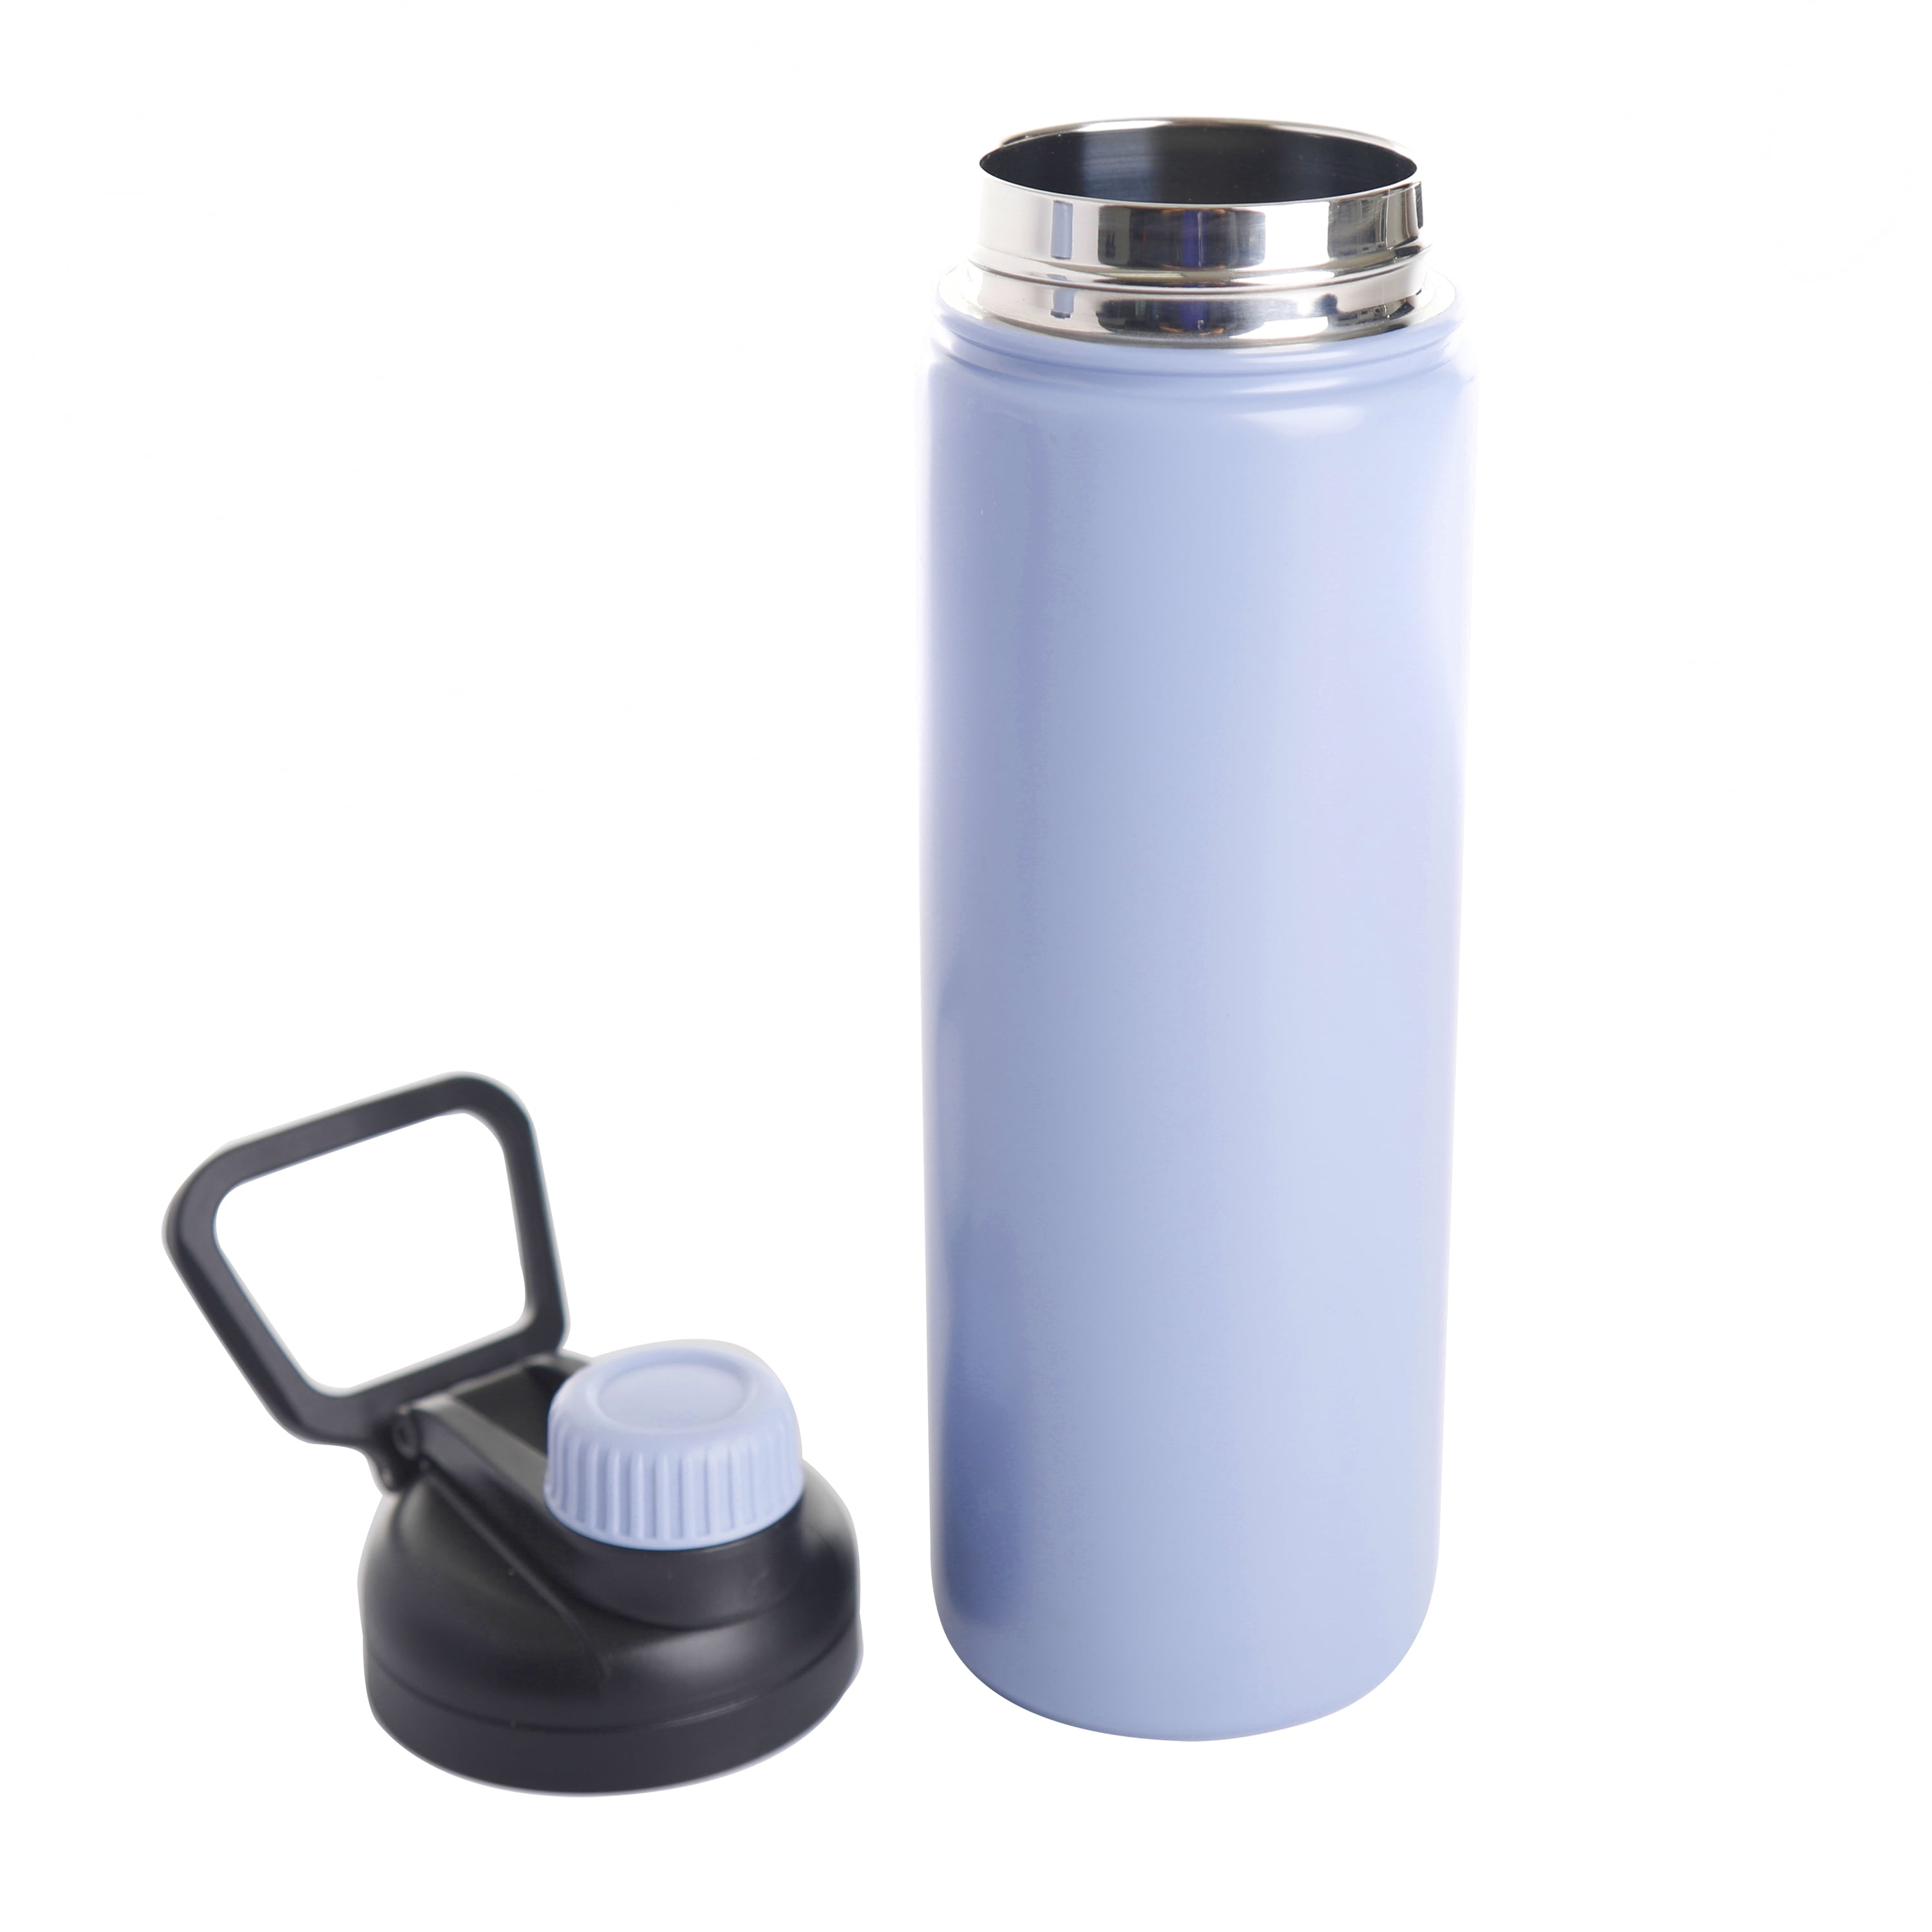 Coocuture Thermos Water Bottle 20 Oz Insulated Stainless Steel Vacuum Flask  Keeps Liquids Hot&Cold, Leak Proof and Double-Walled Design - Blue